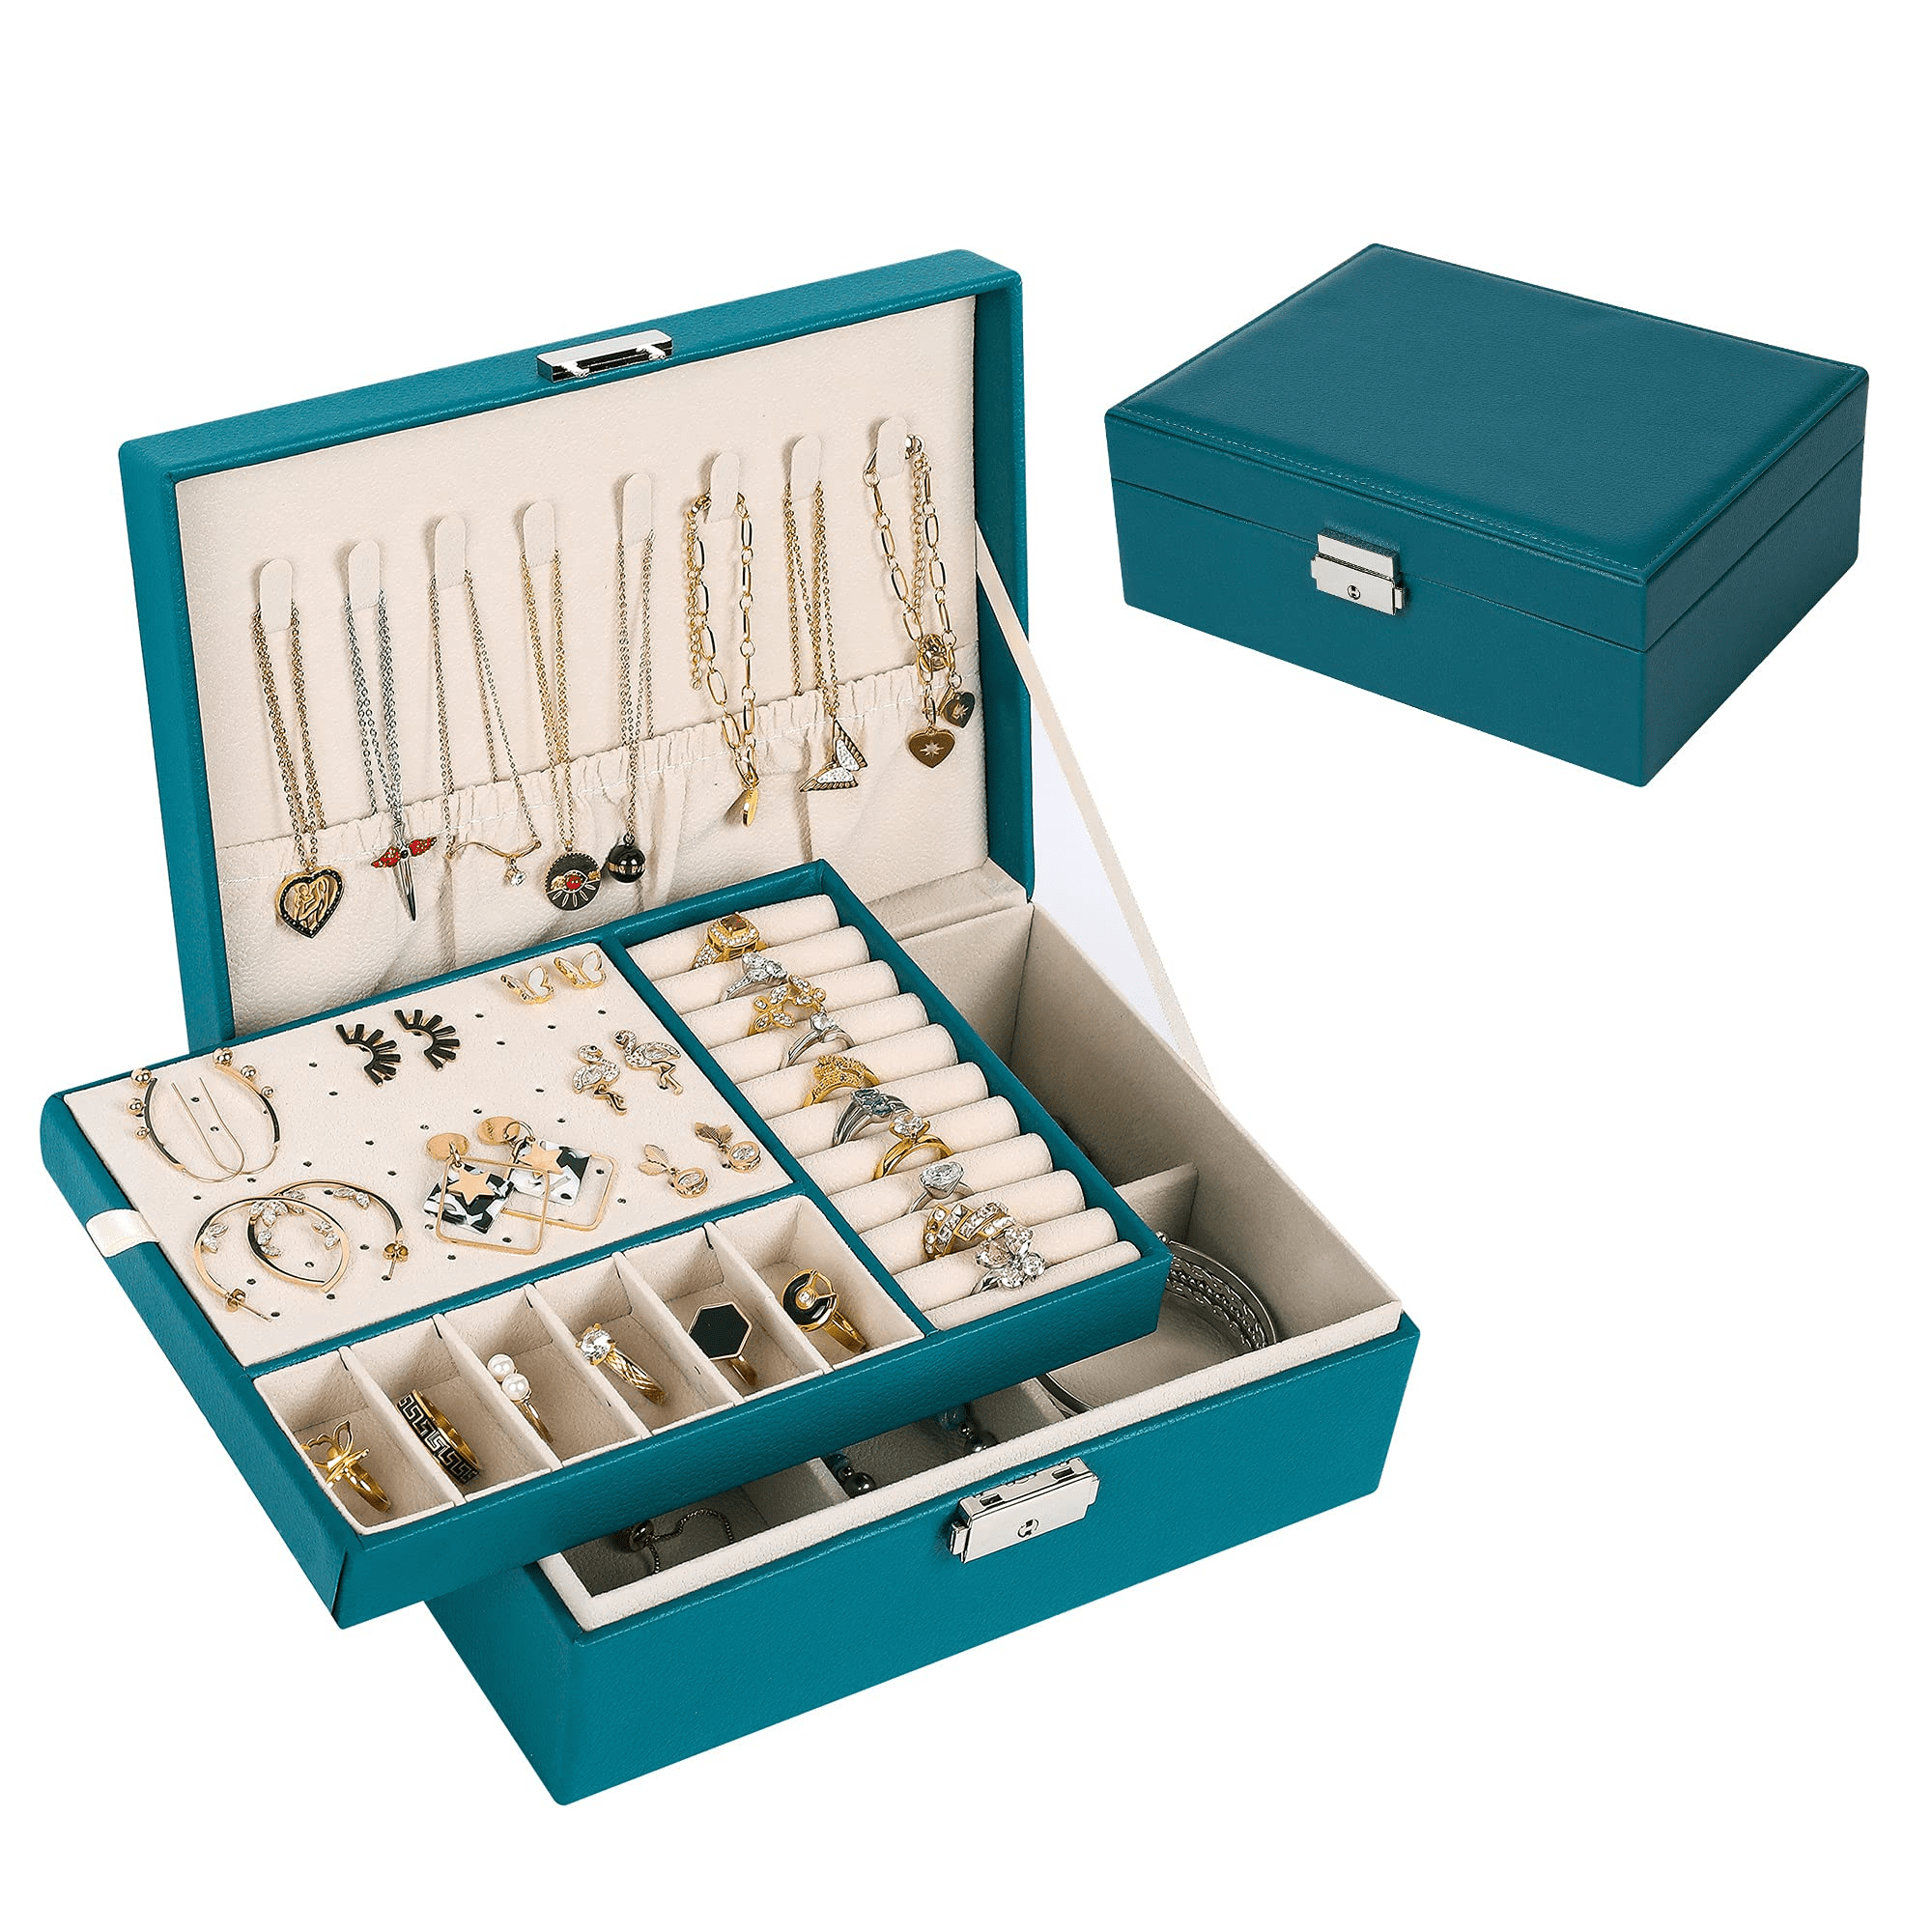 KCY Jewelry Box Organizer for Women Girls,Large PU Leather Jewellery Storage Case with 2 Layers Display Holder & Removeable Tray for Earrings Rings